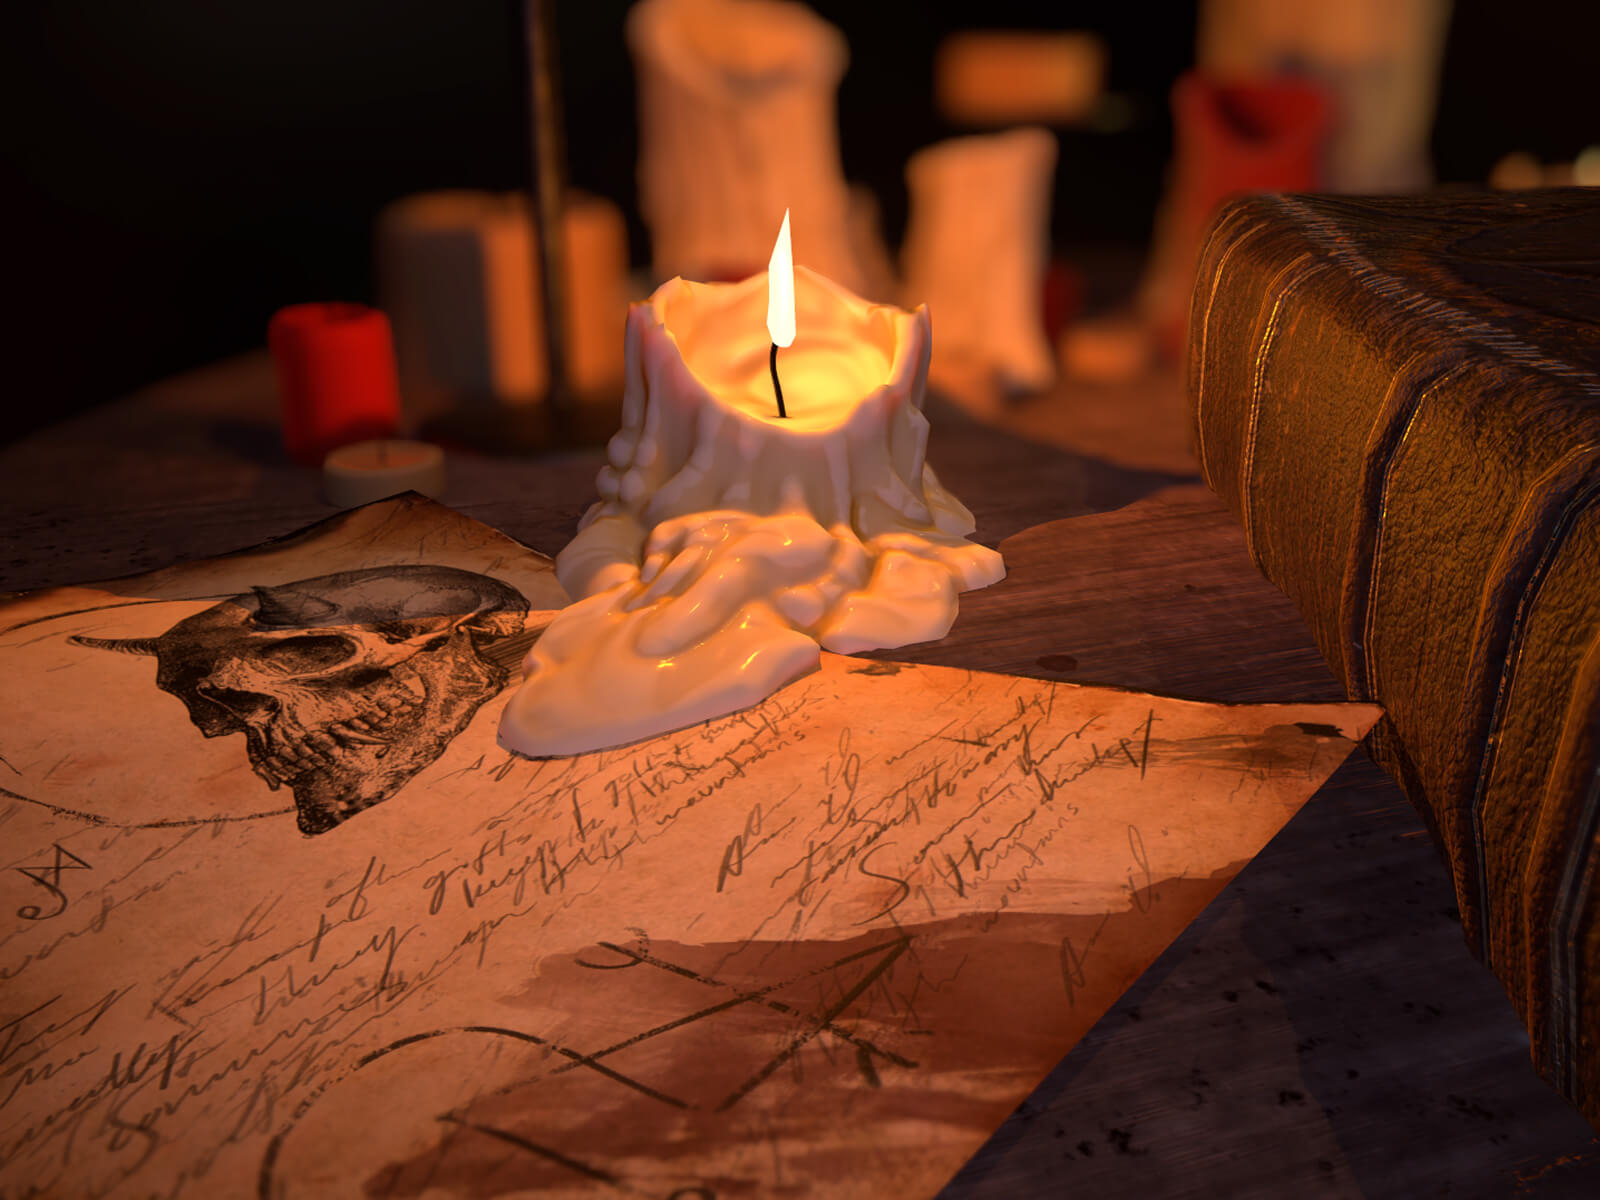 computer-generated 3D environment featuring a melting, lit candle dripping wax on a skull-adorned parchment